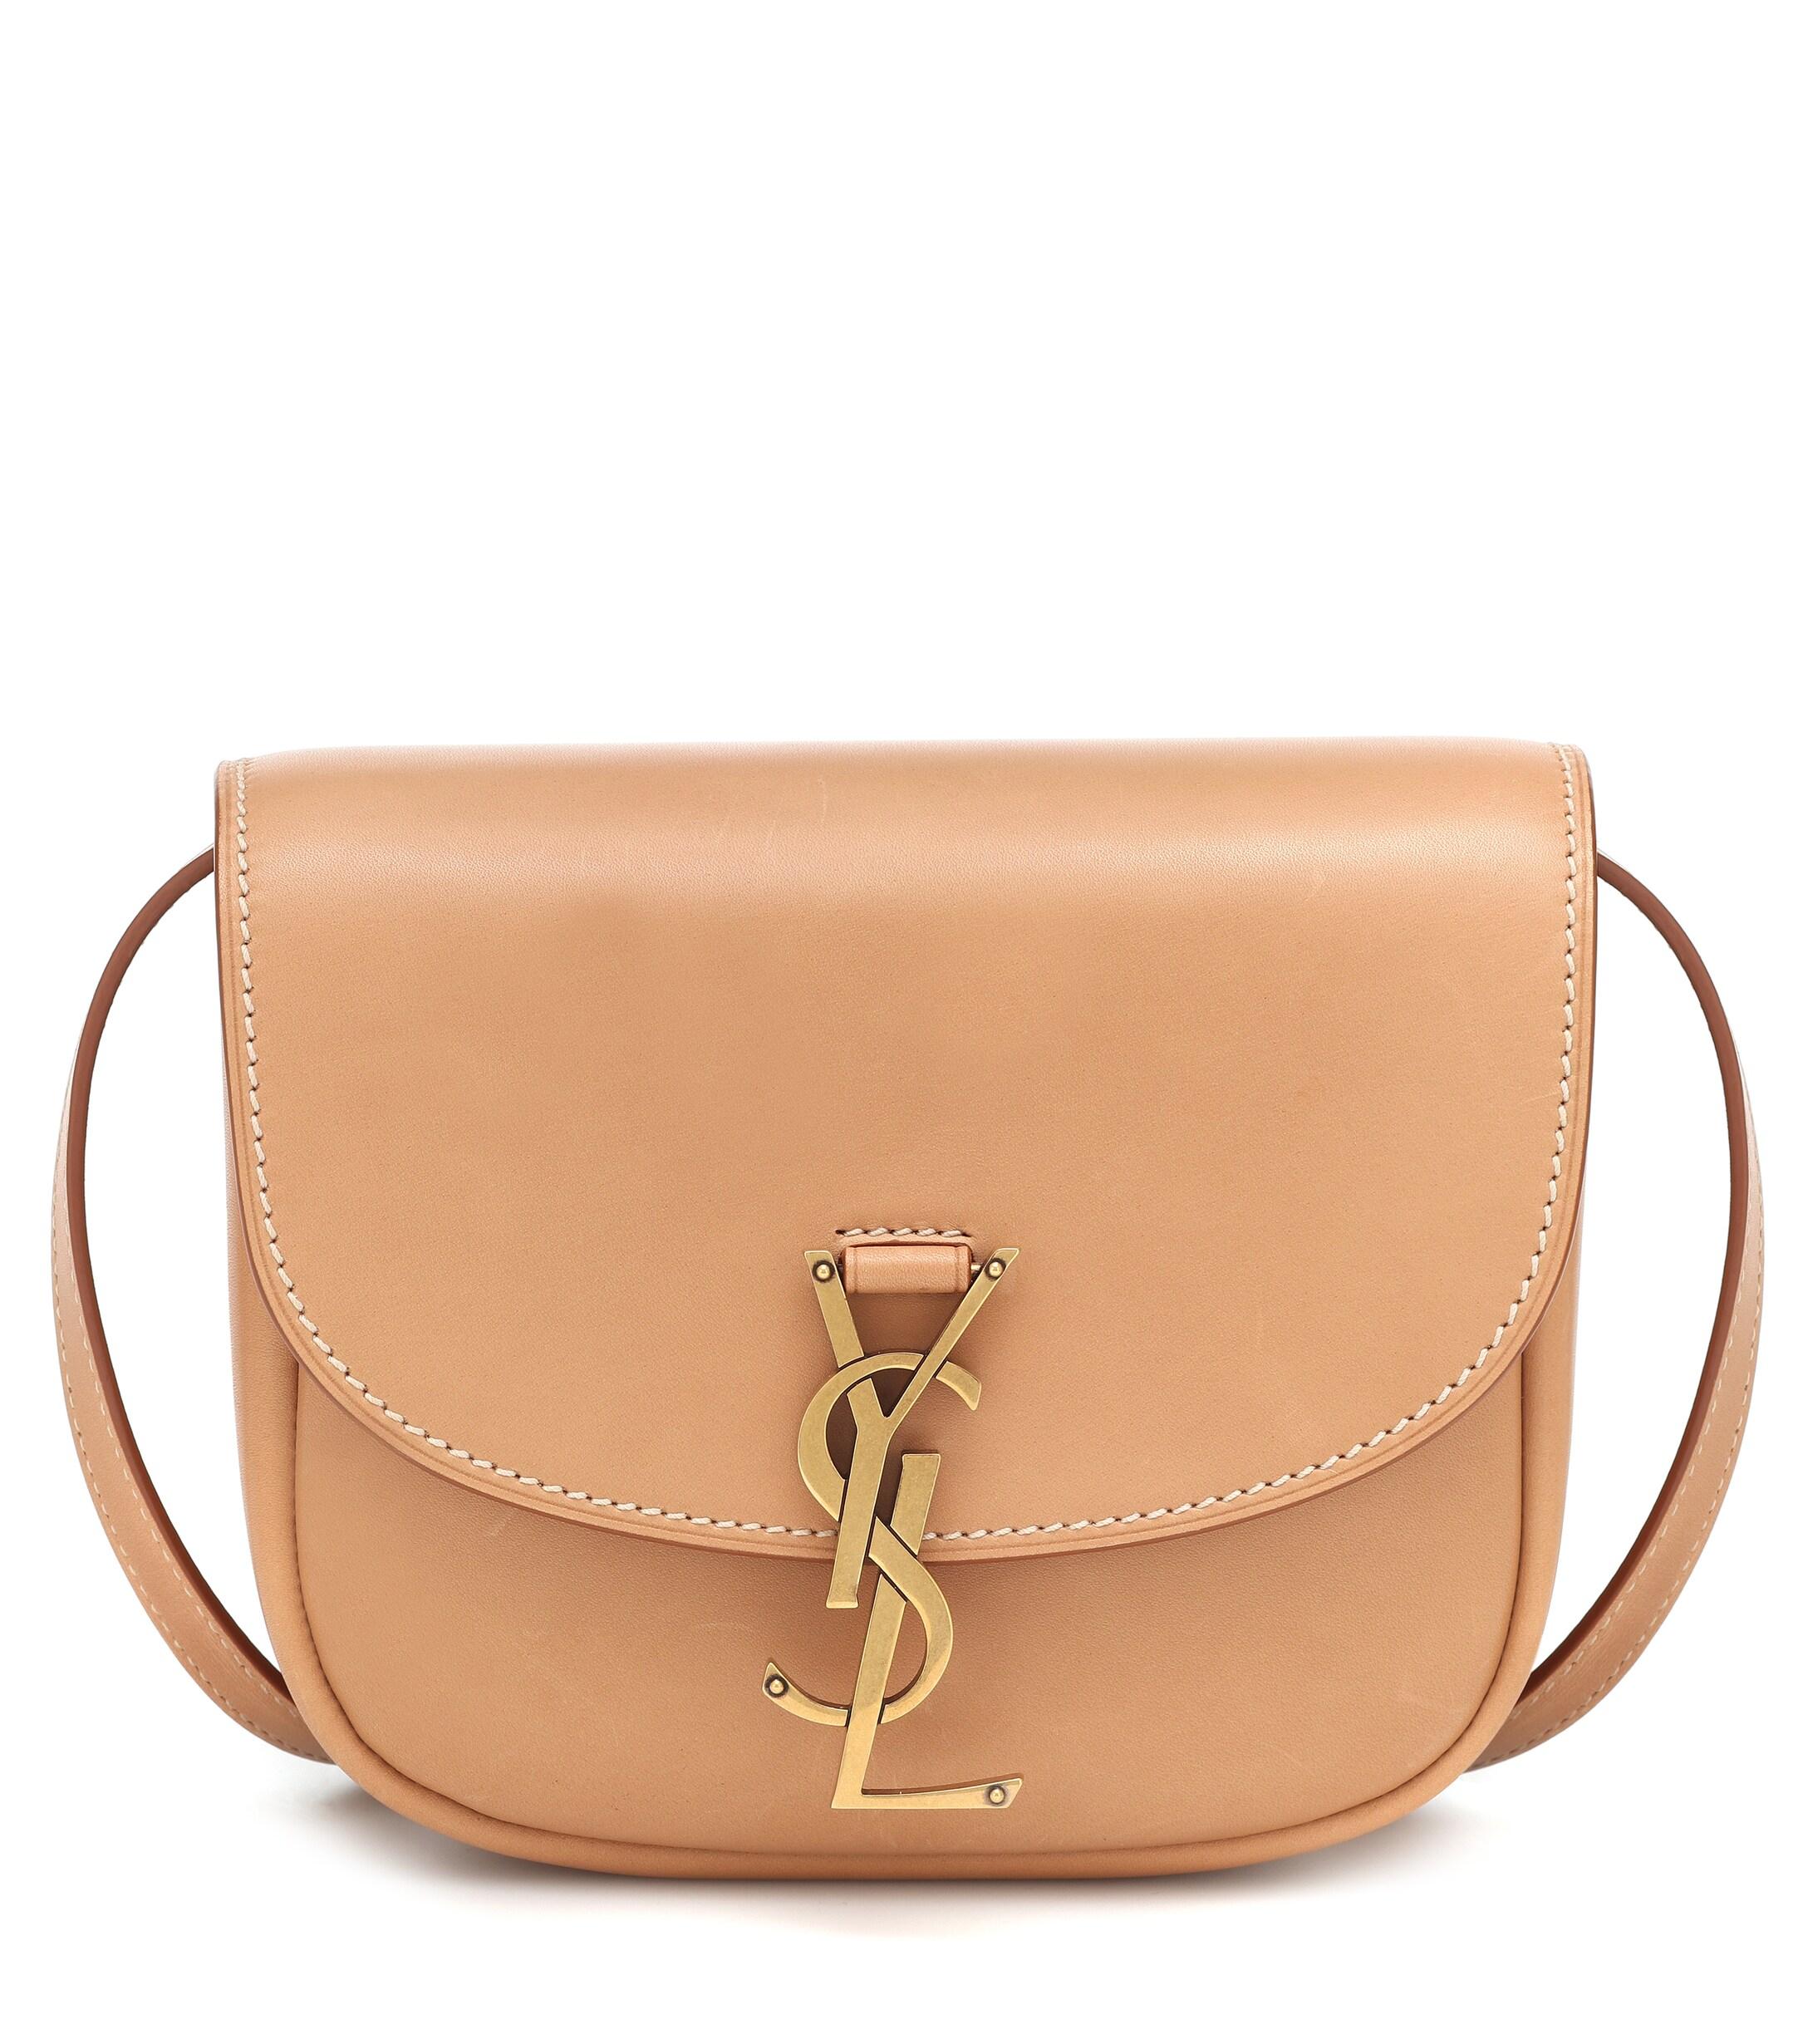 Saint Laurent Kaia Small Leather Crossbody Bag in Brown | Lyst